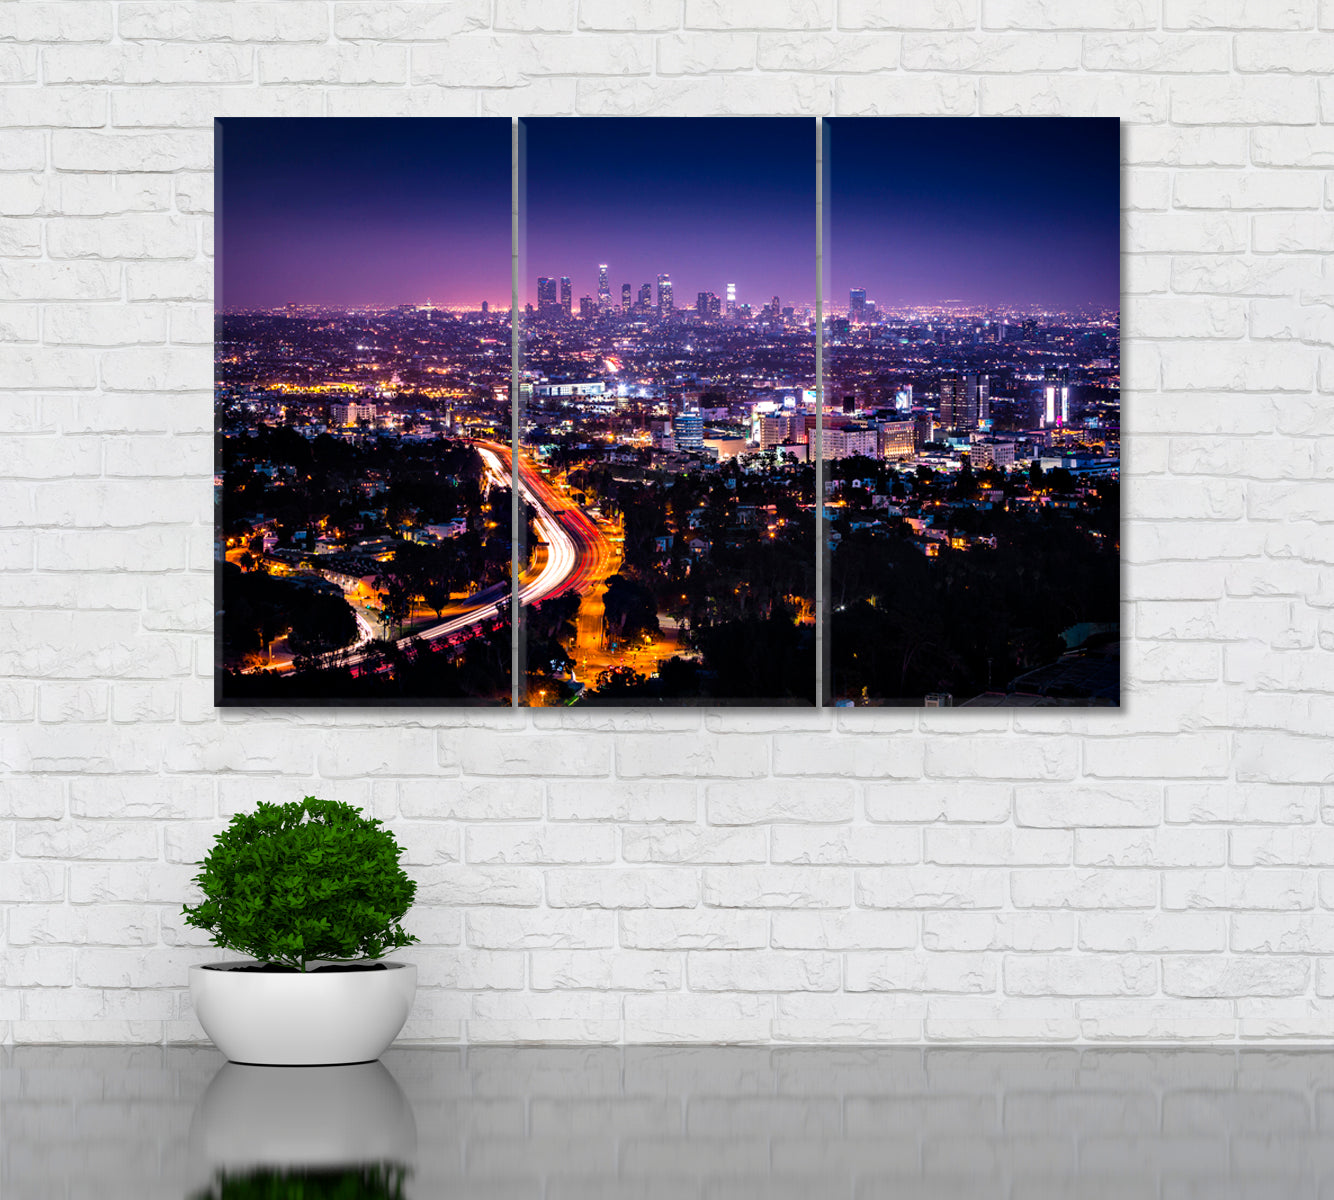 Los Angeles Skyline at Night Canvas Print ArtLexy 3 Panels 36"x24" inches 